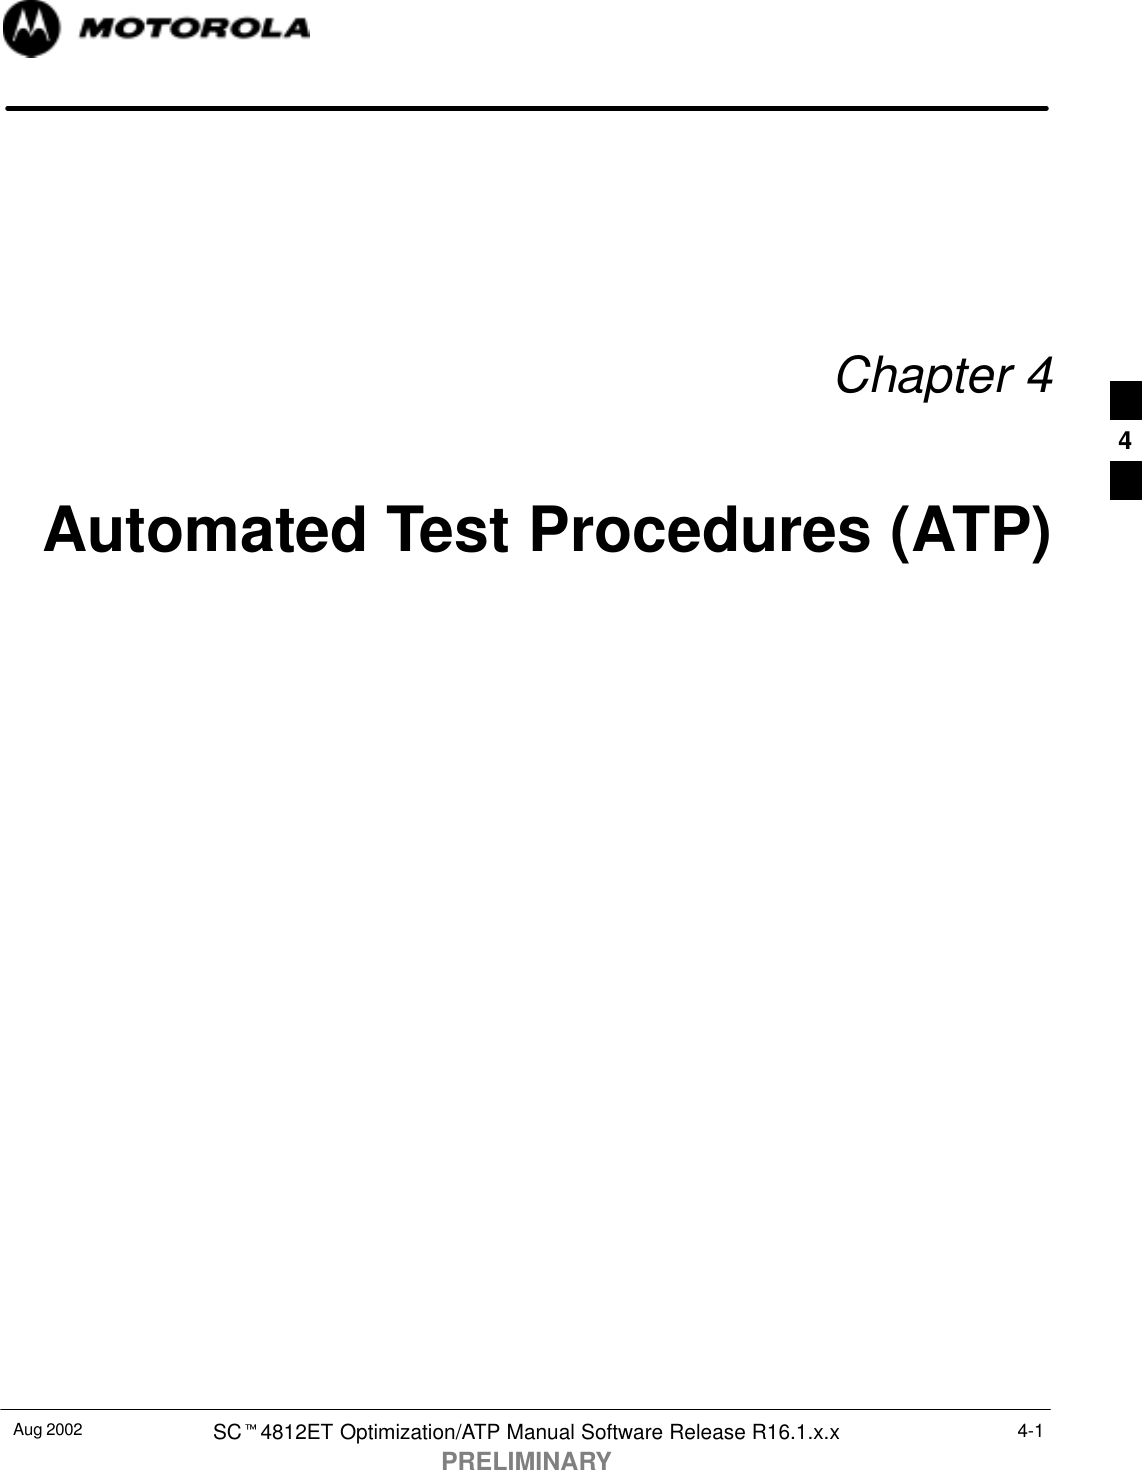 Aug 2002 SCt4812ET Optimization/ATP Manual Software Release R16.1.x.xPRELIMINARY4-1Chapter 4Automated Test Procedures (ATP)4